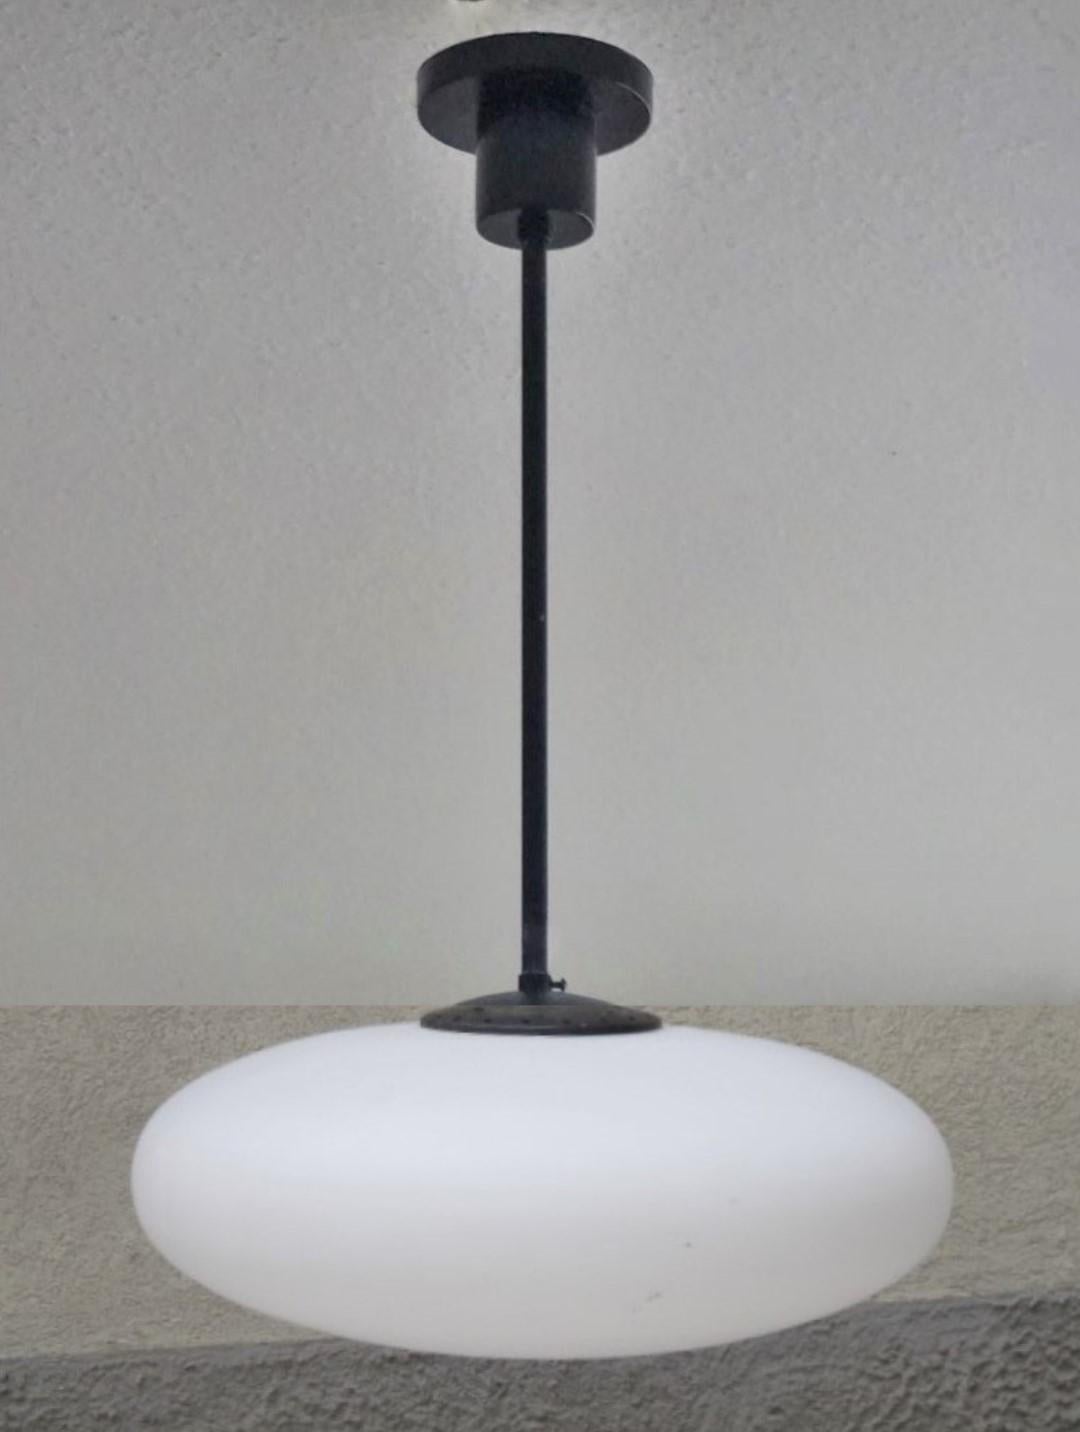 Pendant by Arredoluce manufactured in Italy, 1950s. With large brushed satin glass diffuser, black enameled steel mounts. It takes one E27 100w bulb. Rewired and ready to hang.
Measures: Diameter 23